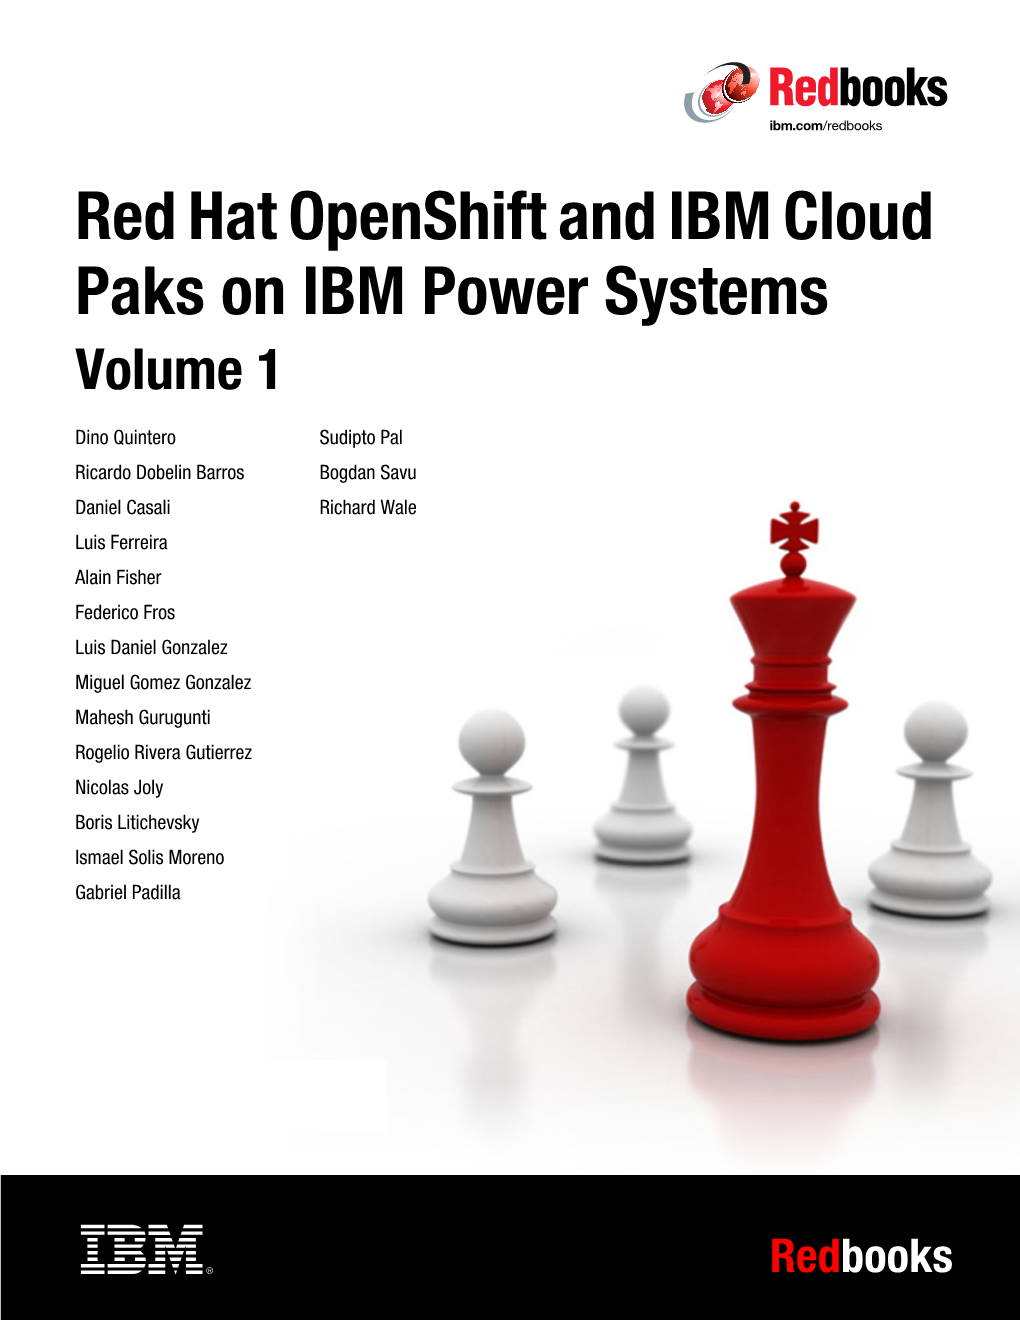 Red Hat Openshift and IBM Cloud Paks on IBM Power Systems Volume 1